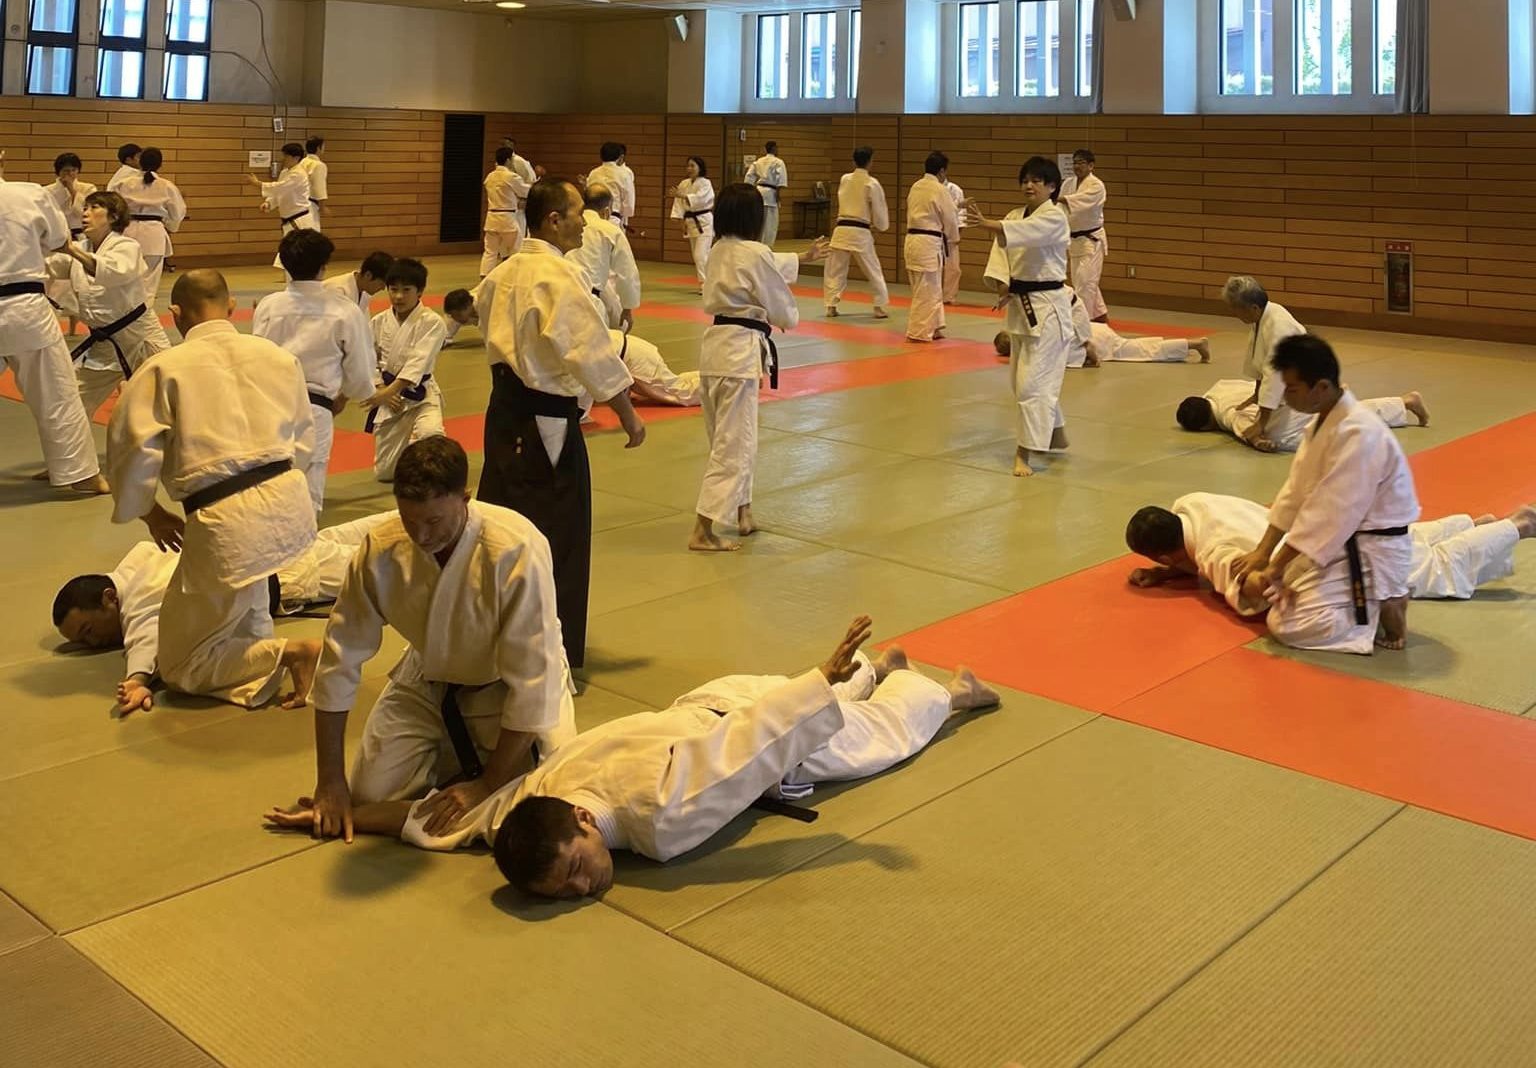 <blockquote><h3></h3>To provide an organised structure and global aikido network in support of member dojos.</blockquote>